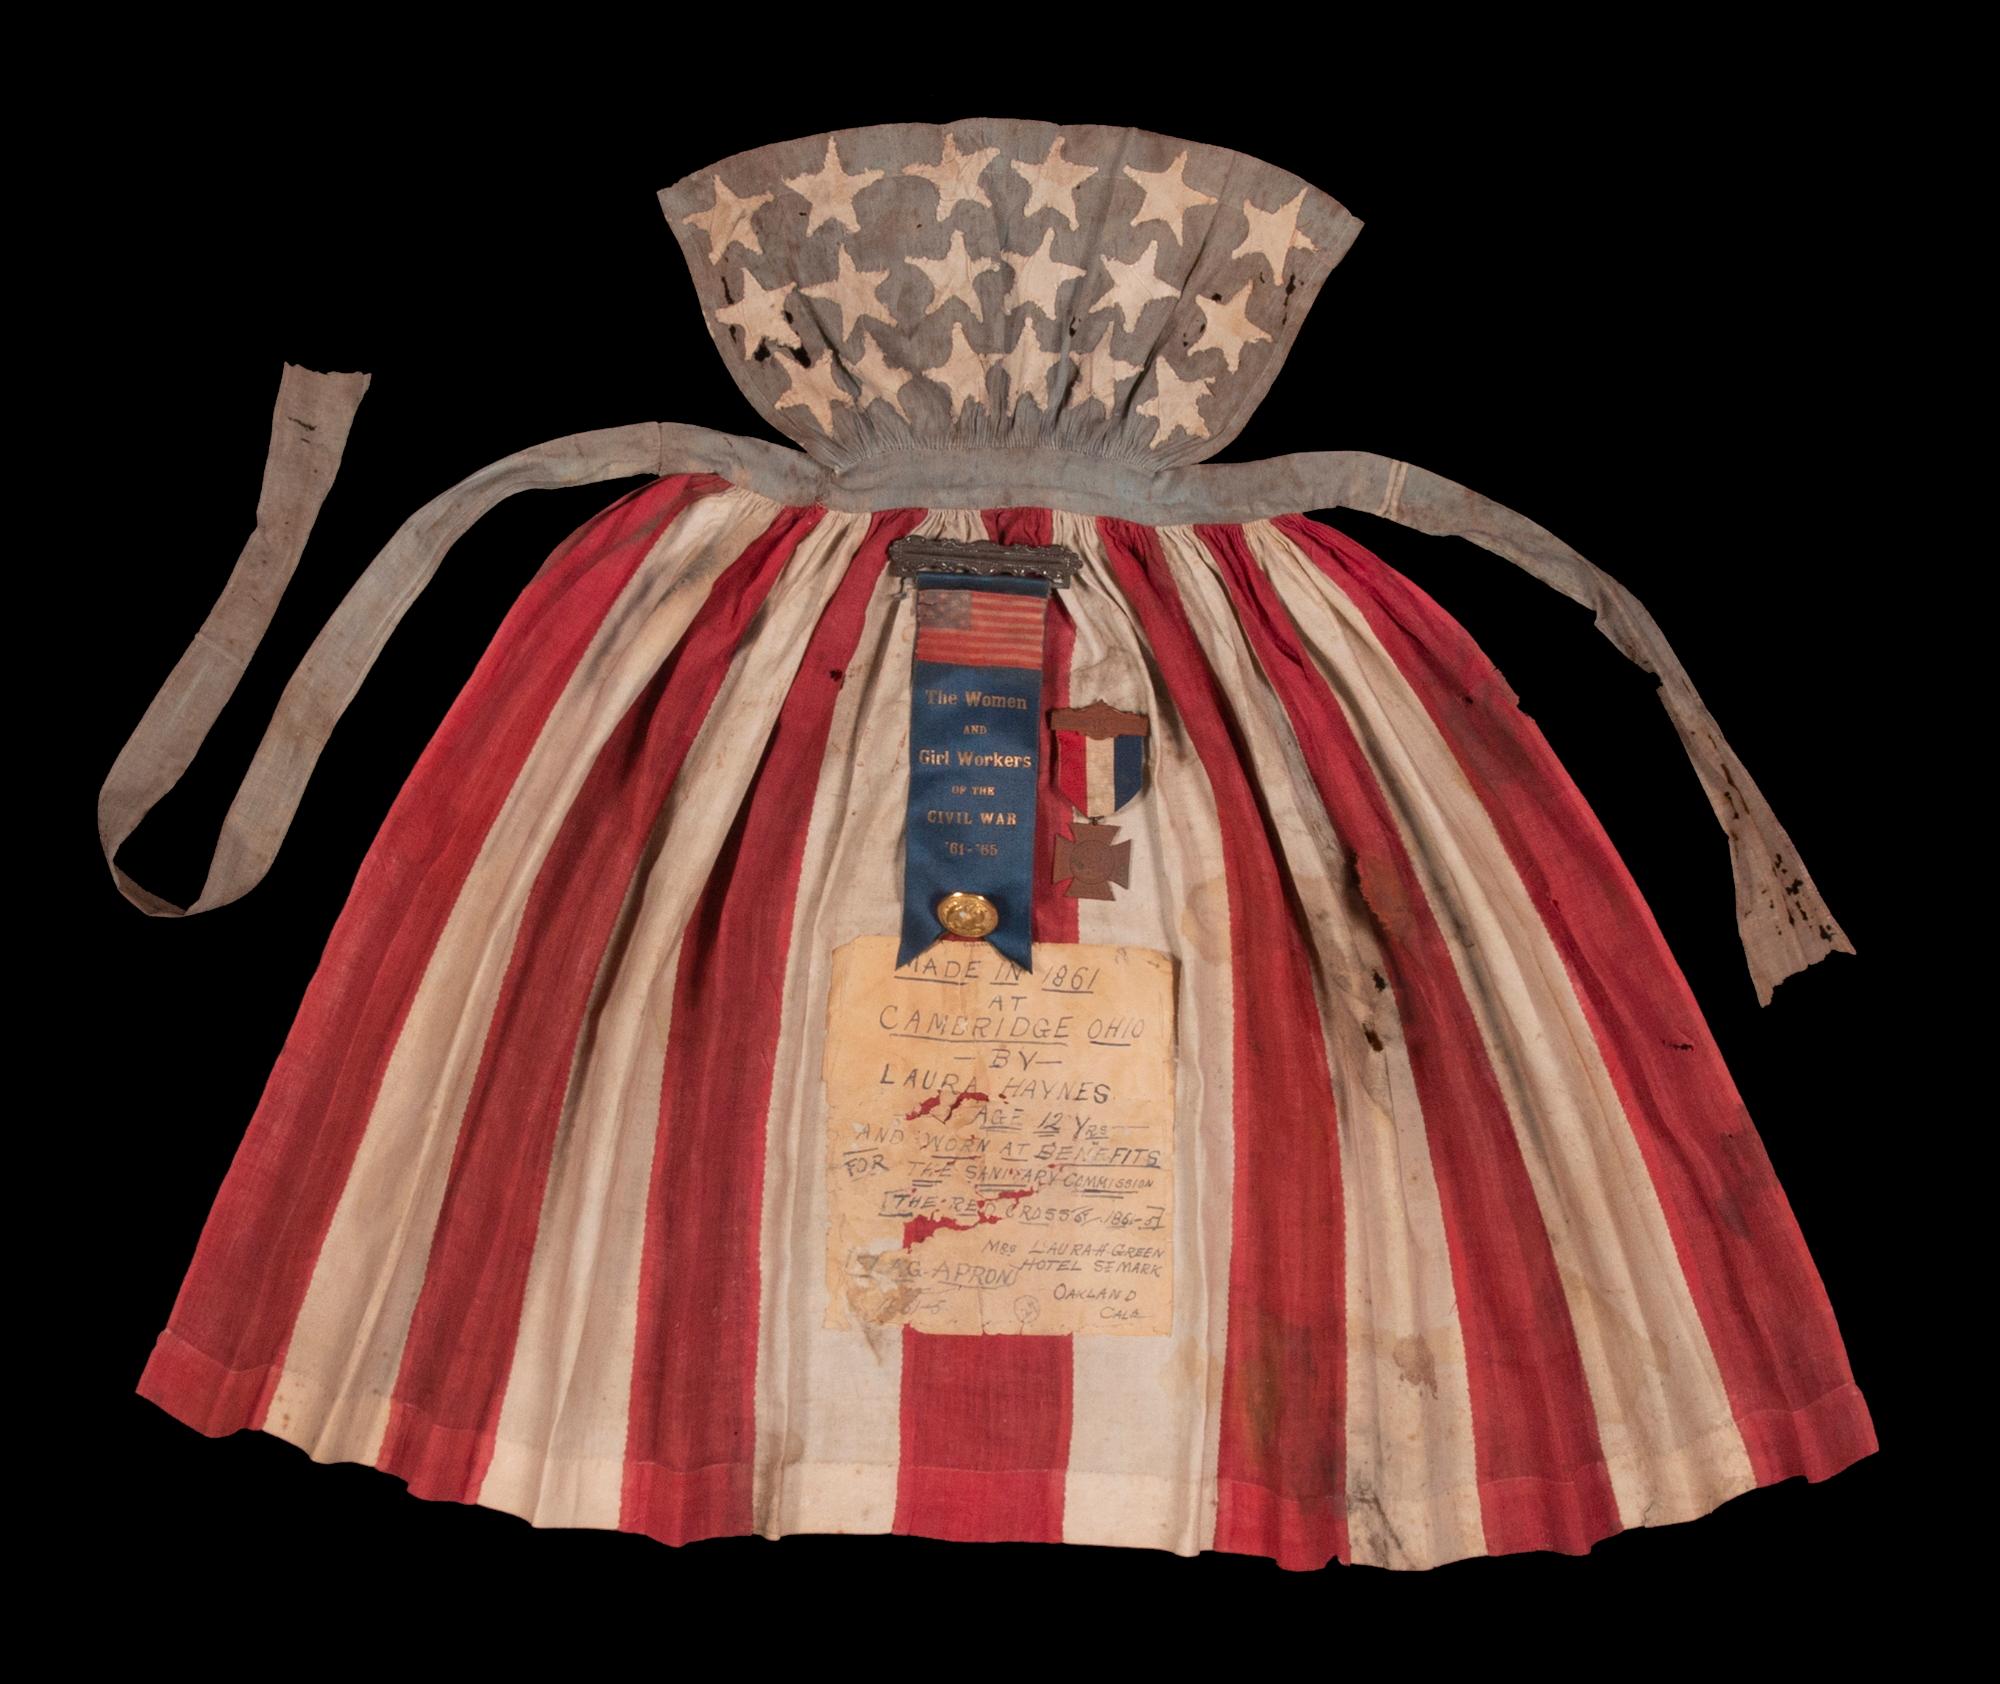 CIVIL WAR PERIOD APRON, MADE IN CAMBRIDGE, OHIO IN 1861 BY 12-YEAR-OLD LAURA HAYNES, WORN BY HER AT BENEFITS FOR THE U.S. SANITARY COMMISSION, PREDECESSOR OF THE RED CROSS, THAT STAFFED, FUNDED, AND MODERNIZED CIVIL WAR HOSPITALS

Laura Haynes was